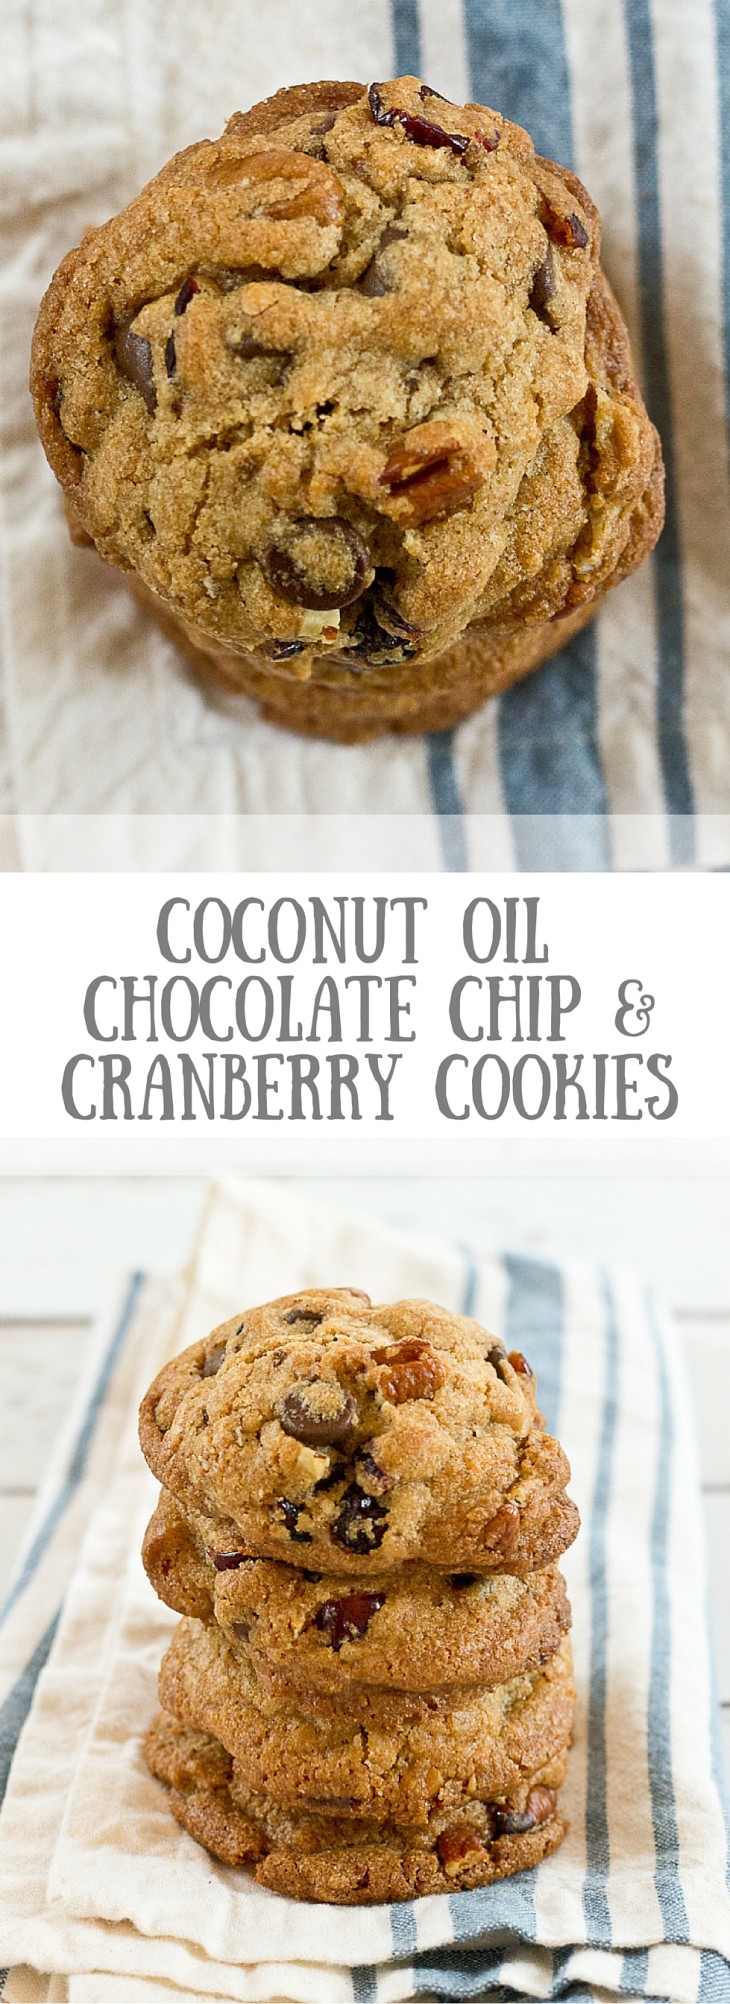 Coconut Oil Chocolate Chip & Cranberry Cookies...have you tried coconut oil in cookies yet? Coconut oil is yummy yum yum in sweet foods. And I LOVE what it does to cookies-- crispy on the edges and soft in the middle kinda of cookies, with a hint of coconut flavor.